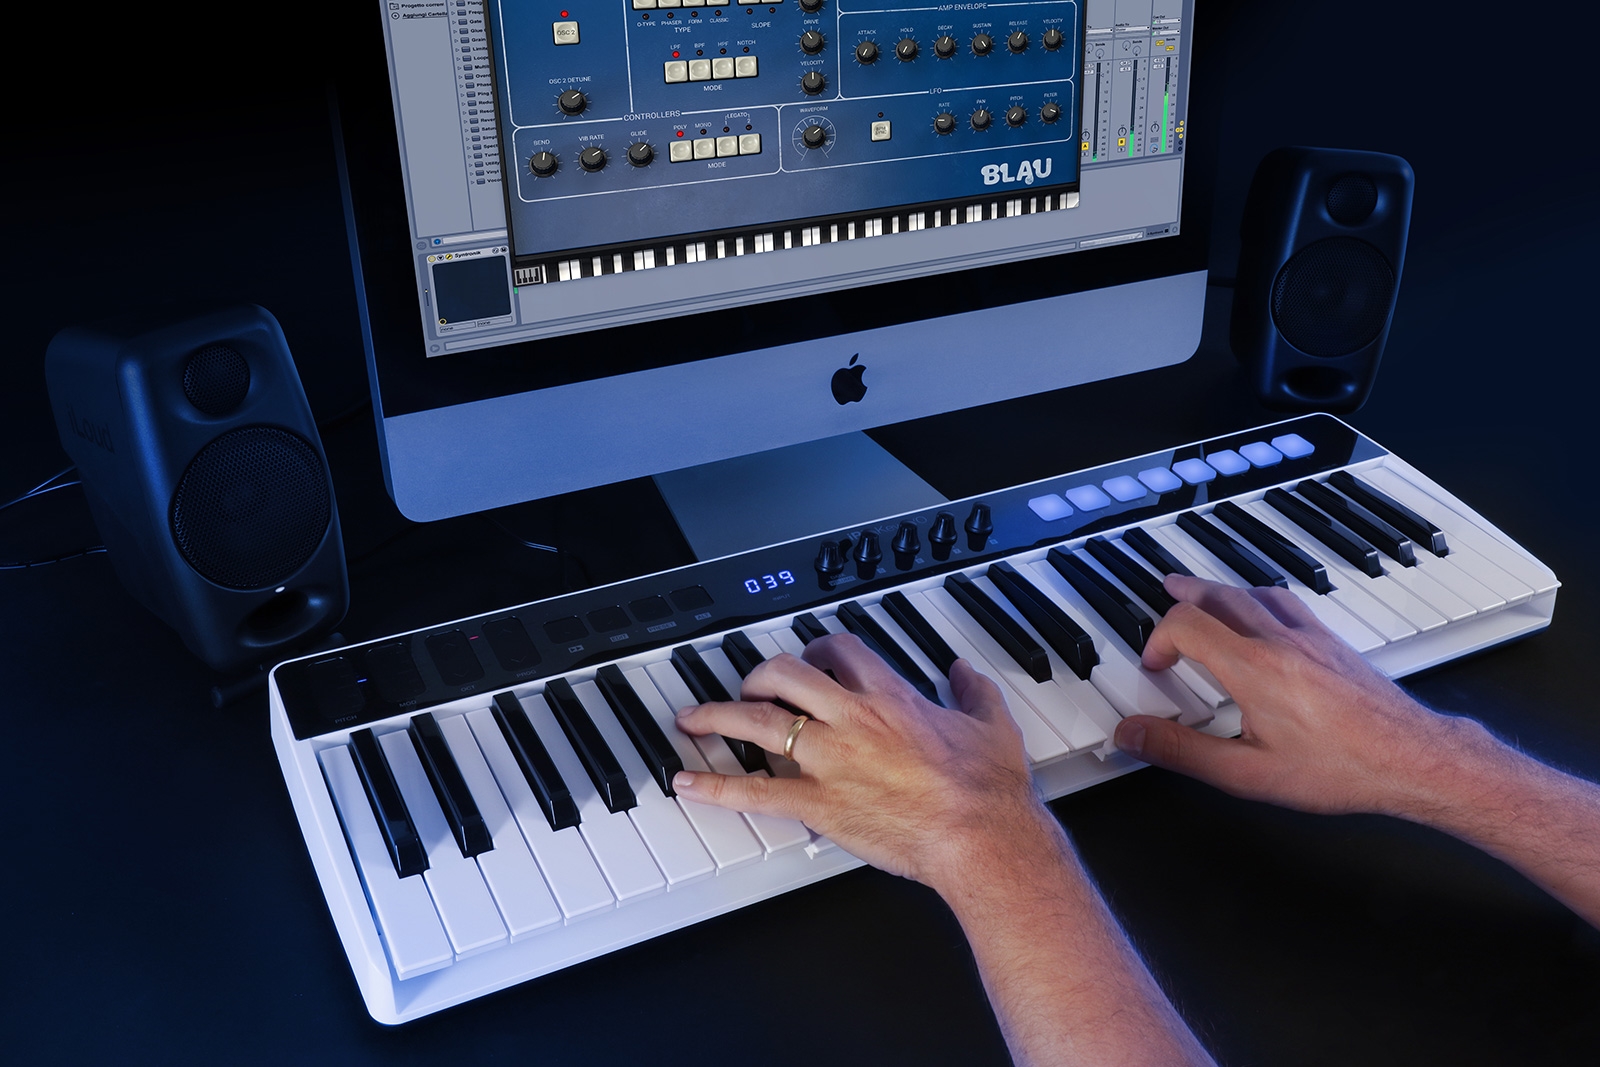 iRig Keys I/O packs in a full audio interface for $200 | DeviceDaily.com